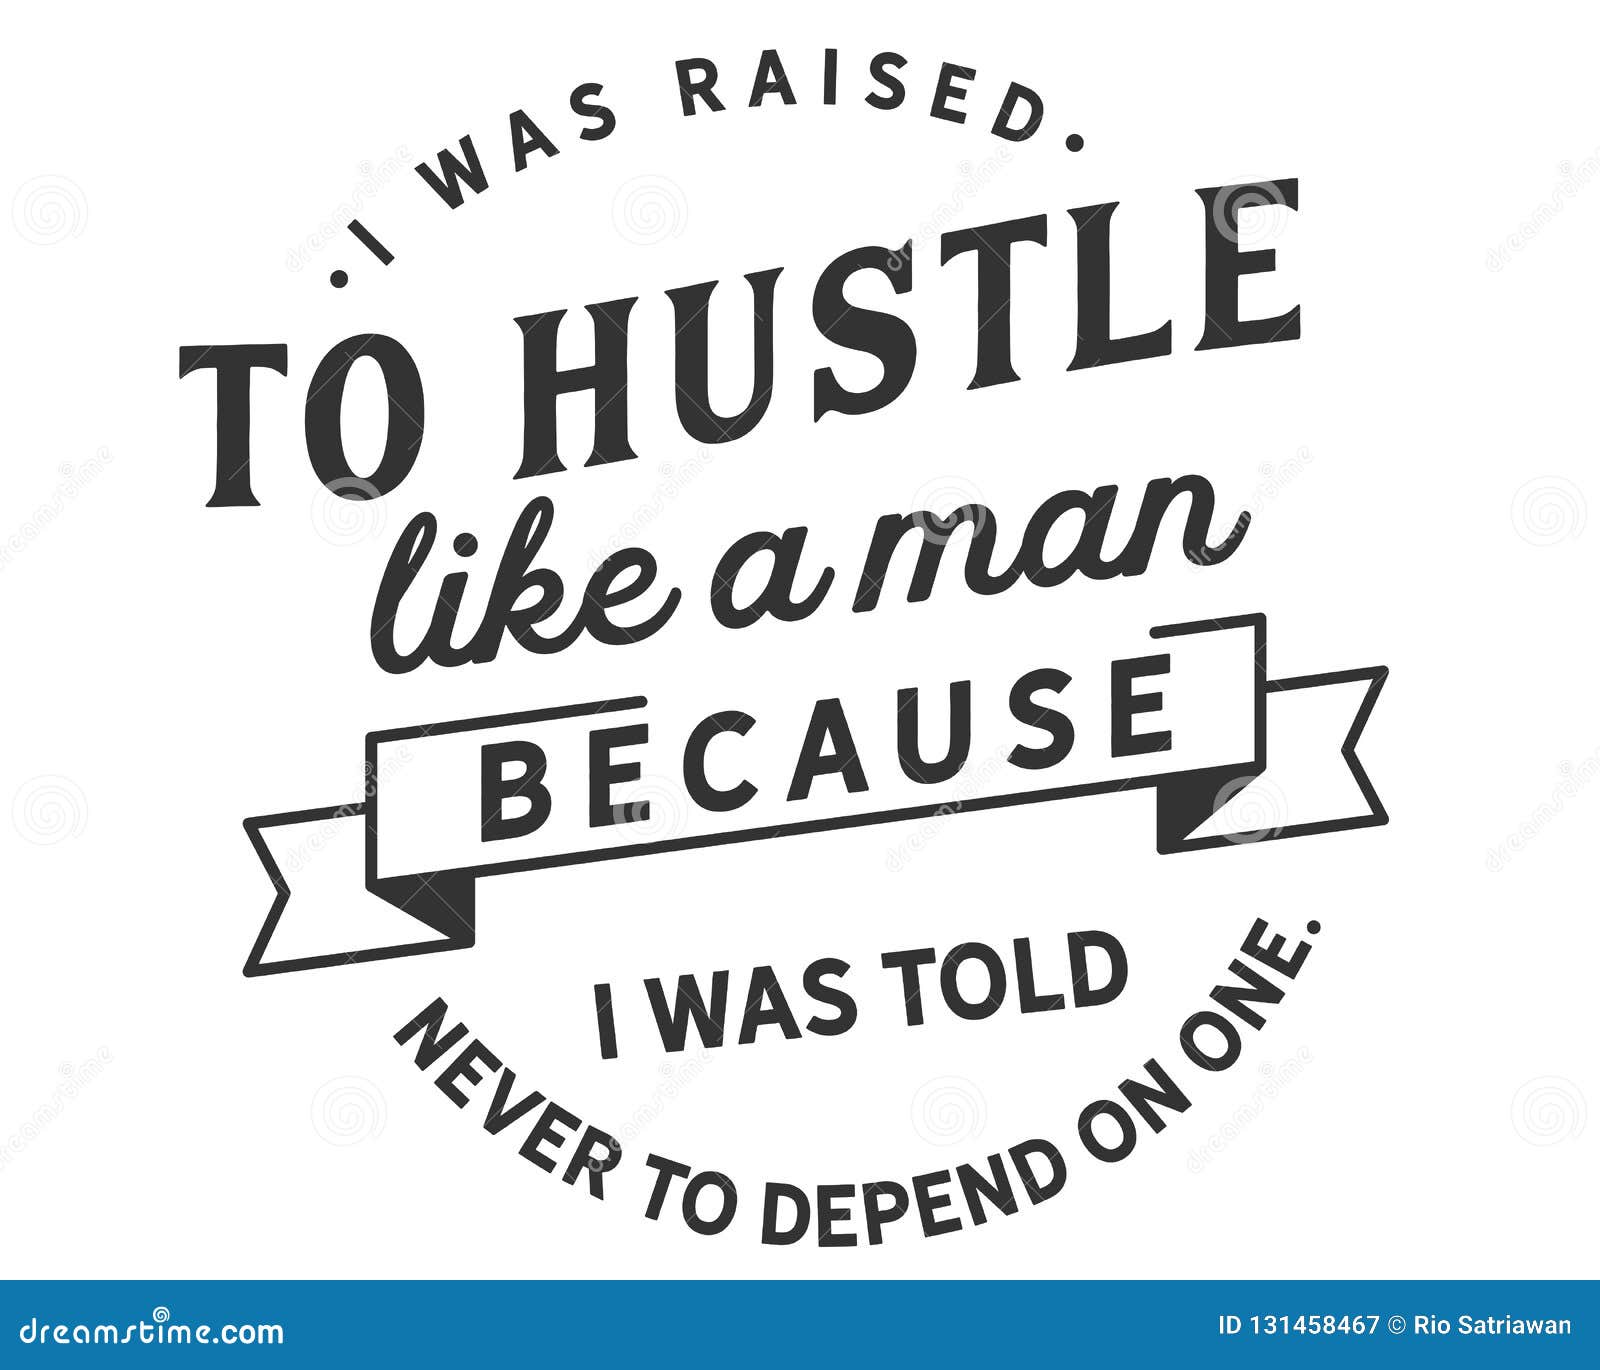 i was raised to hustle like a man because i was told never to depend on one